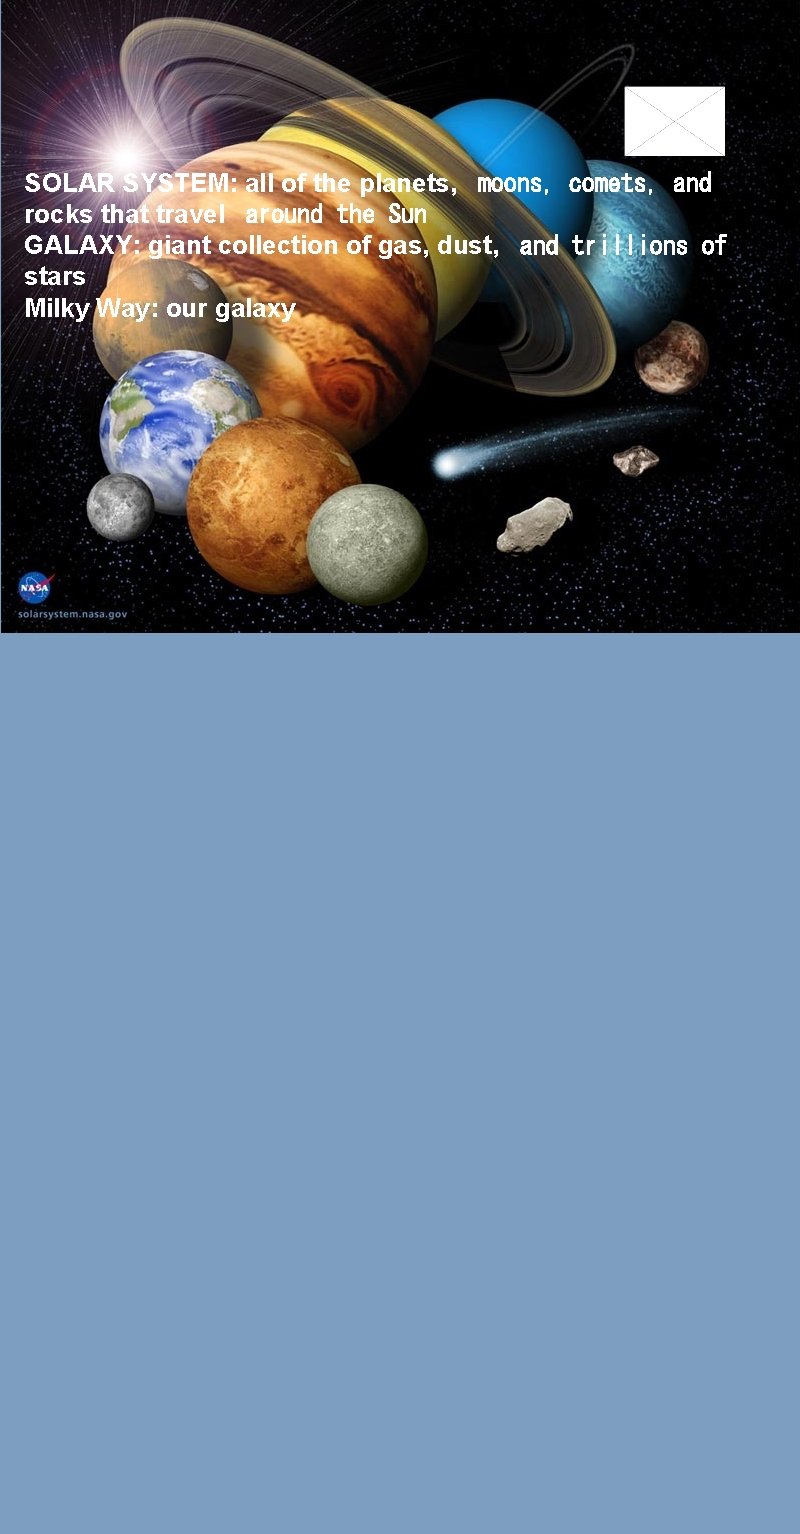 SOLAR SYSTEM: all of the planets,  moons, comets, and rocks that travel  around the